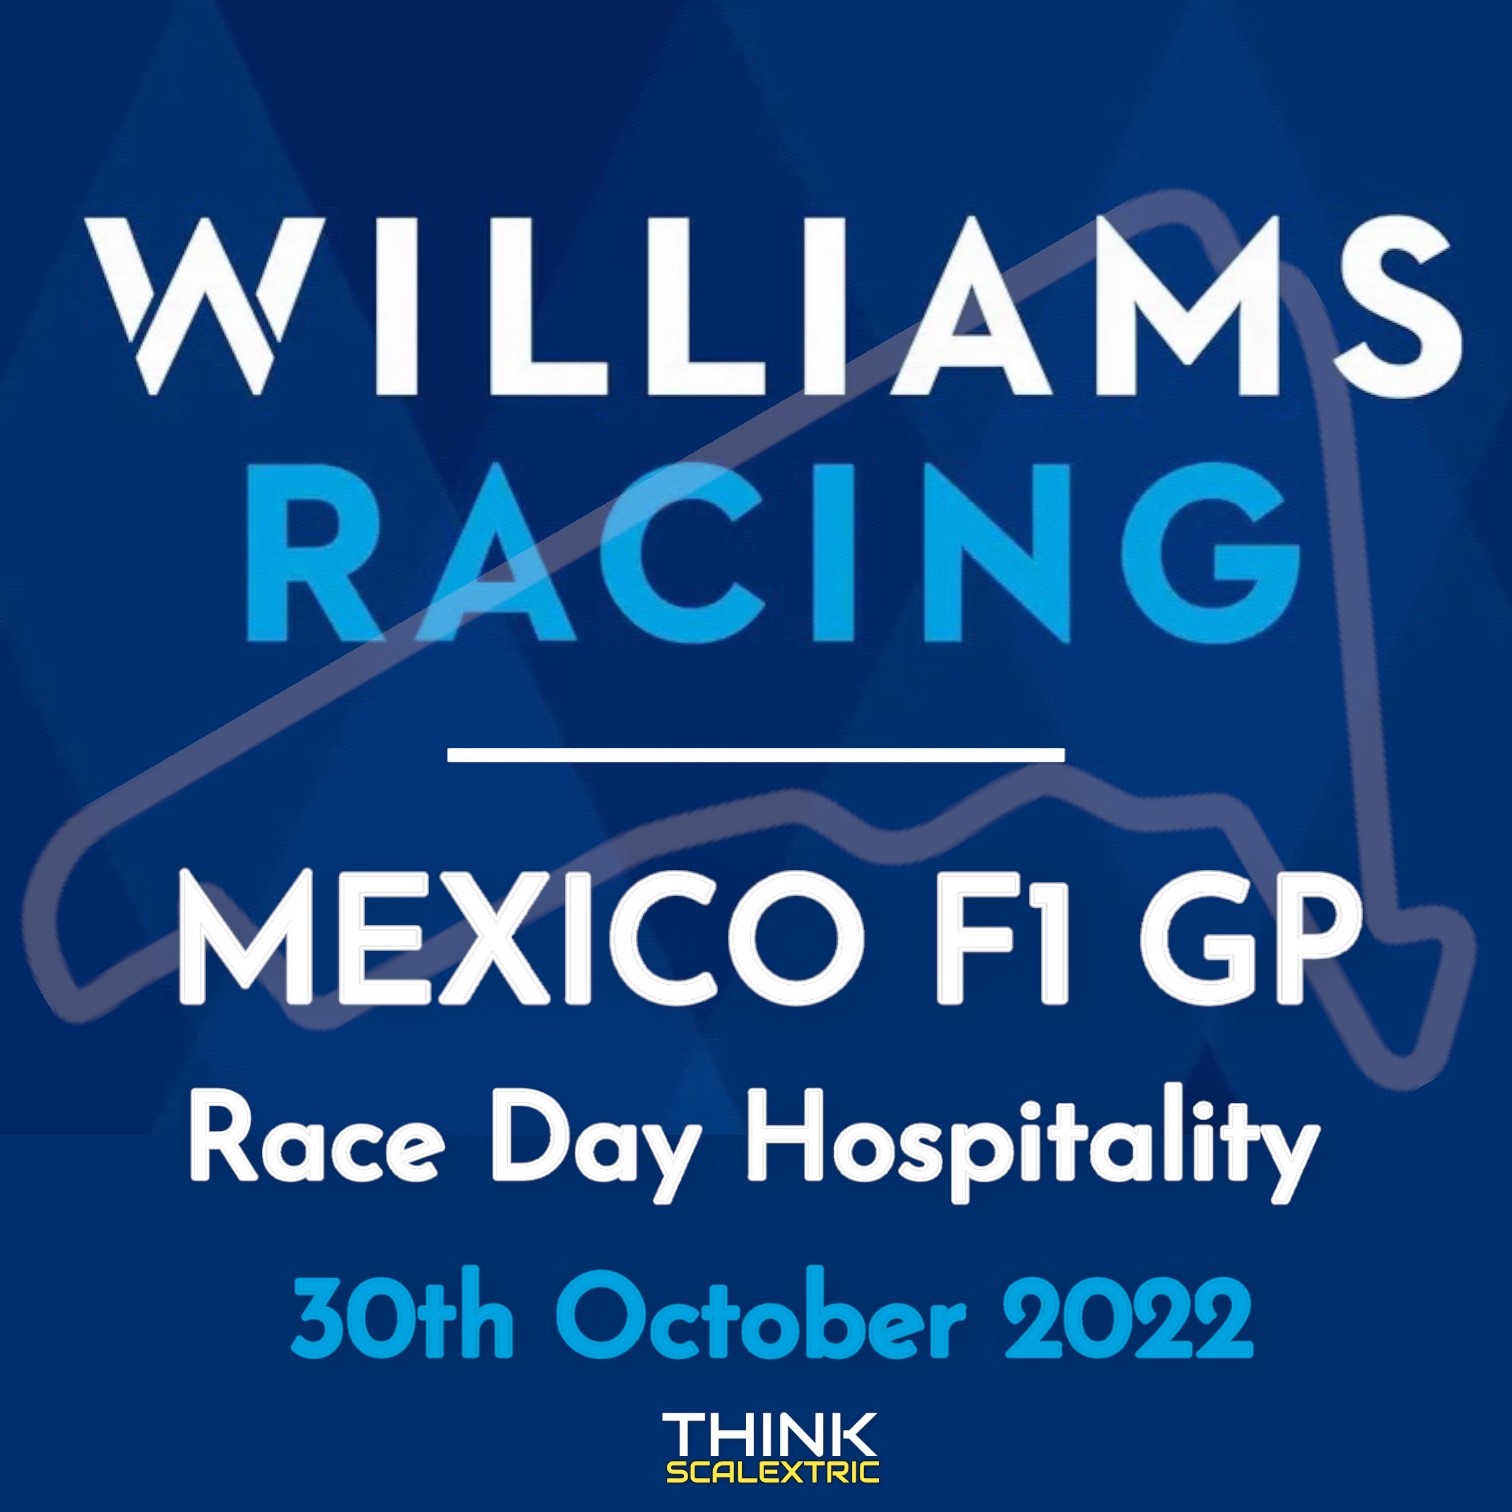 williams racing race day hospitality mexico f1 gp 2022 giant scalextric bespoke track build